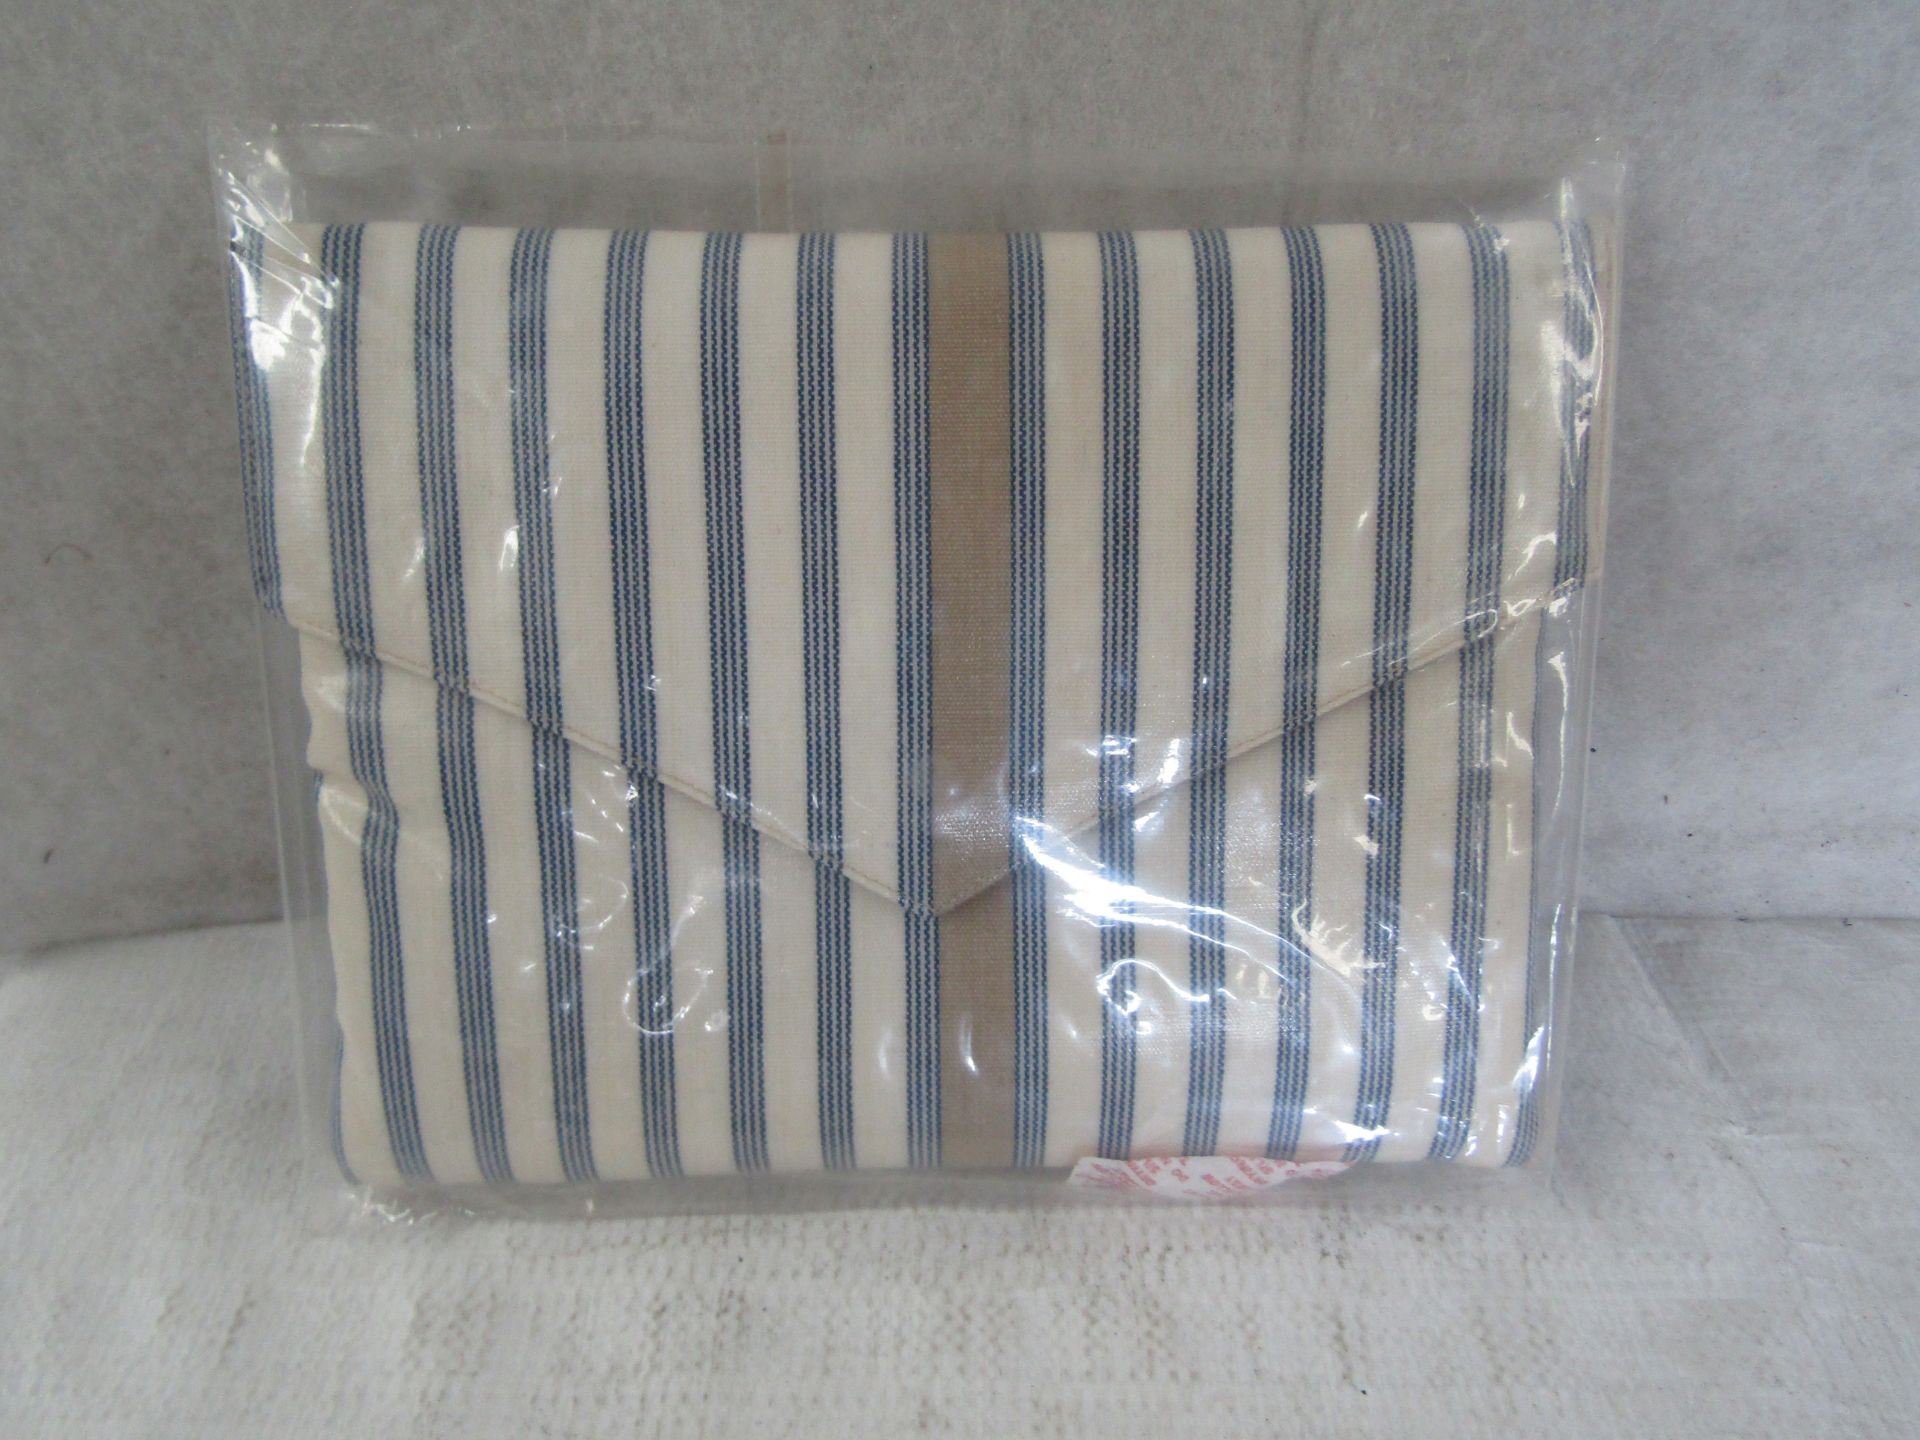 TheStripesCompany - PVC Clutch Purse Small - See Image For Design - New & Packaged.